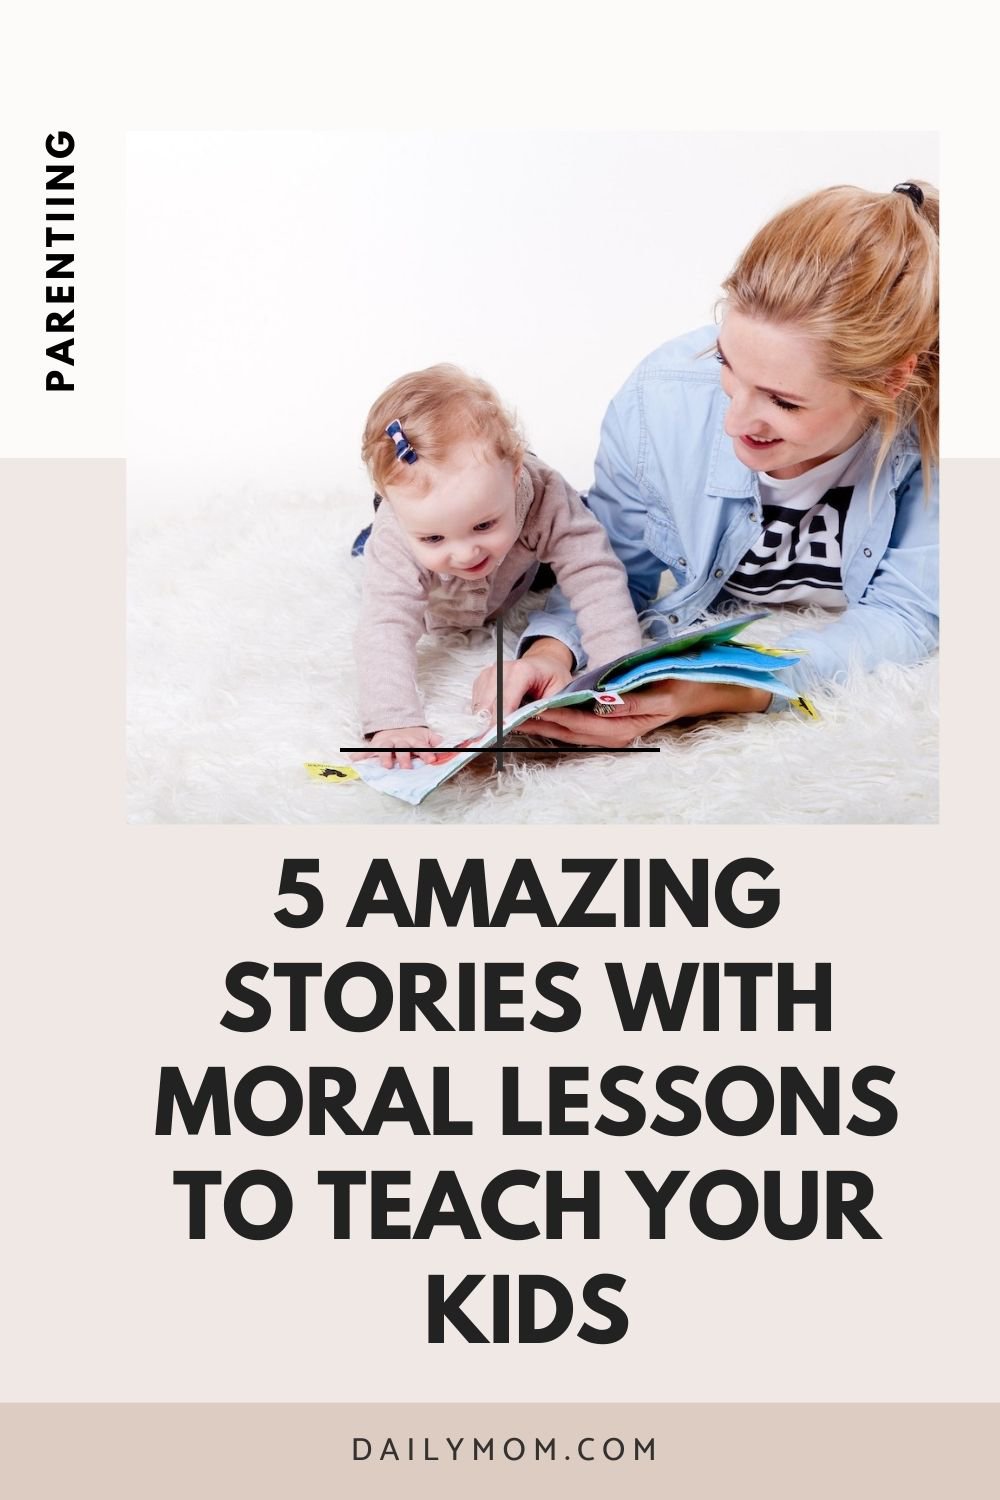 5 Amazing Stories With Moral Lessons To Teach Your Kids